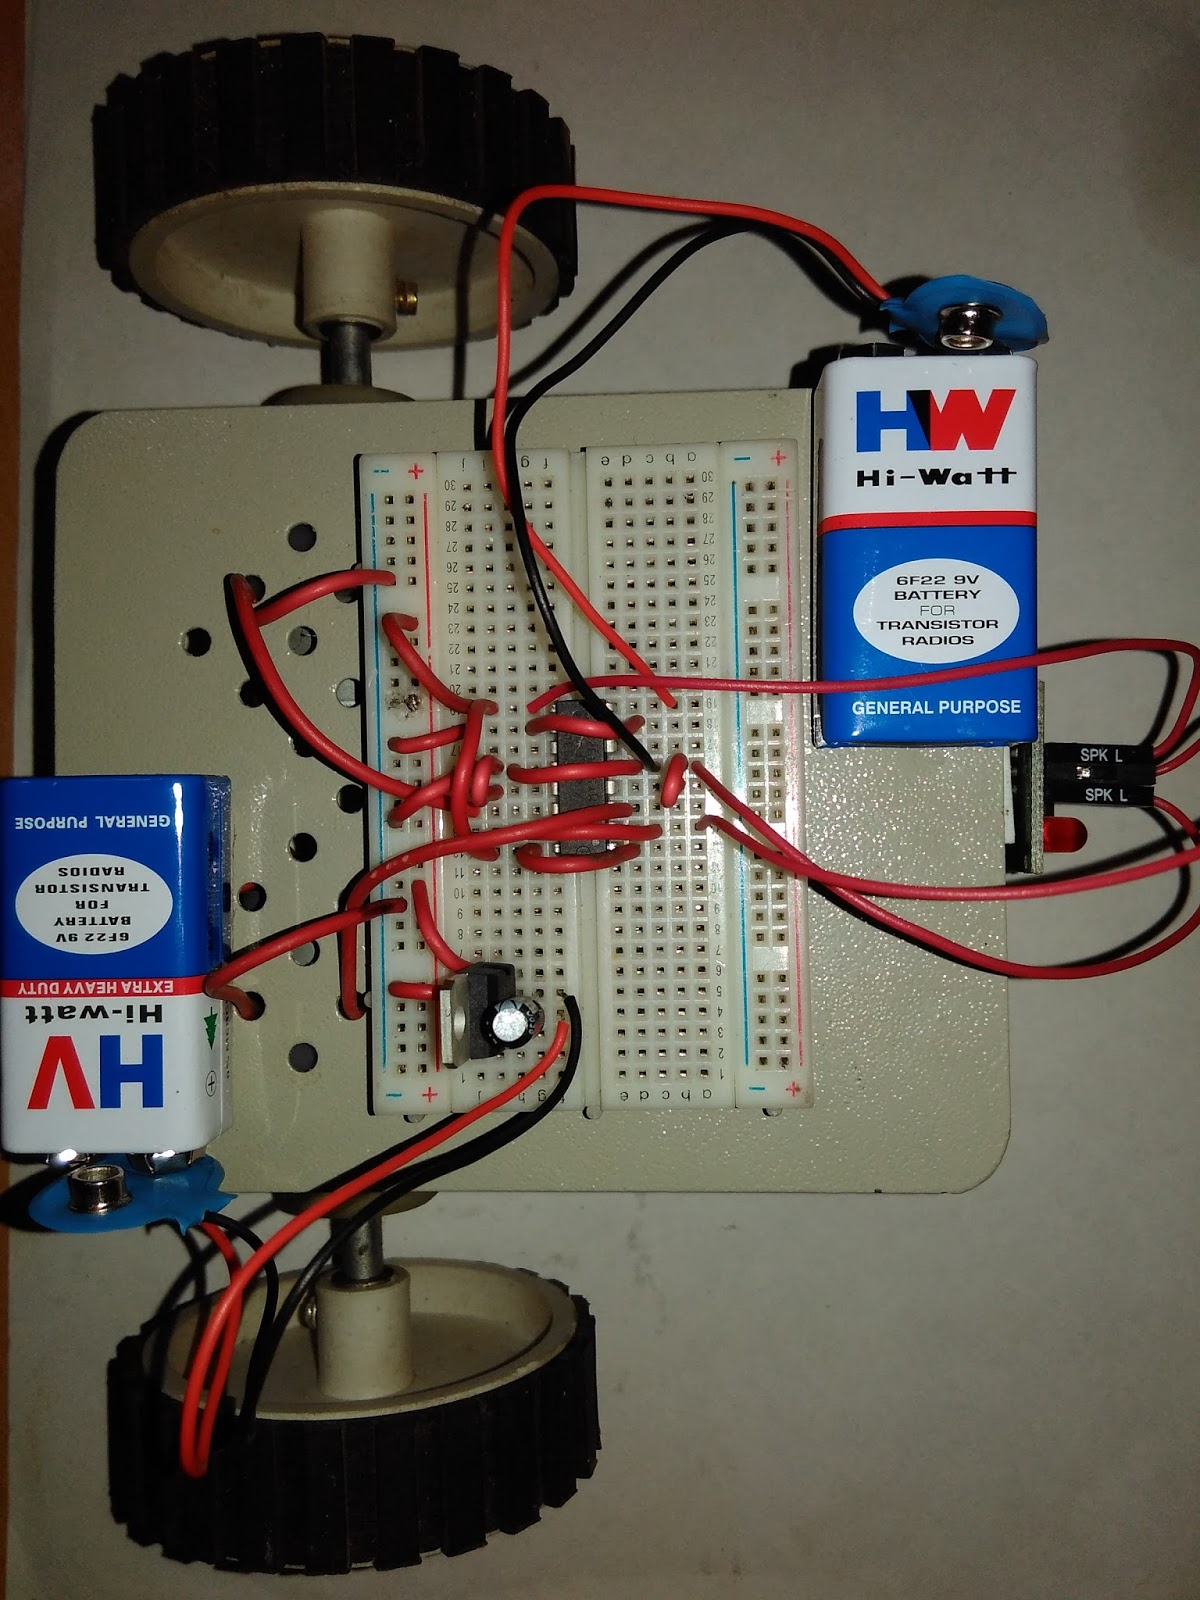 Fun with electronics and sensors: Line follower robot without using